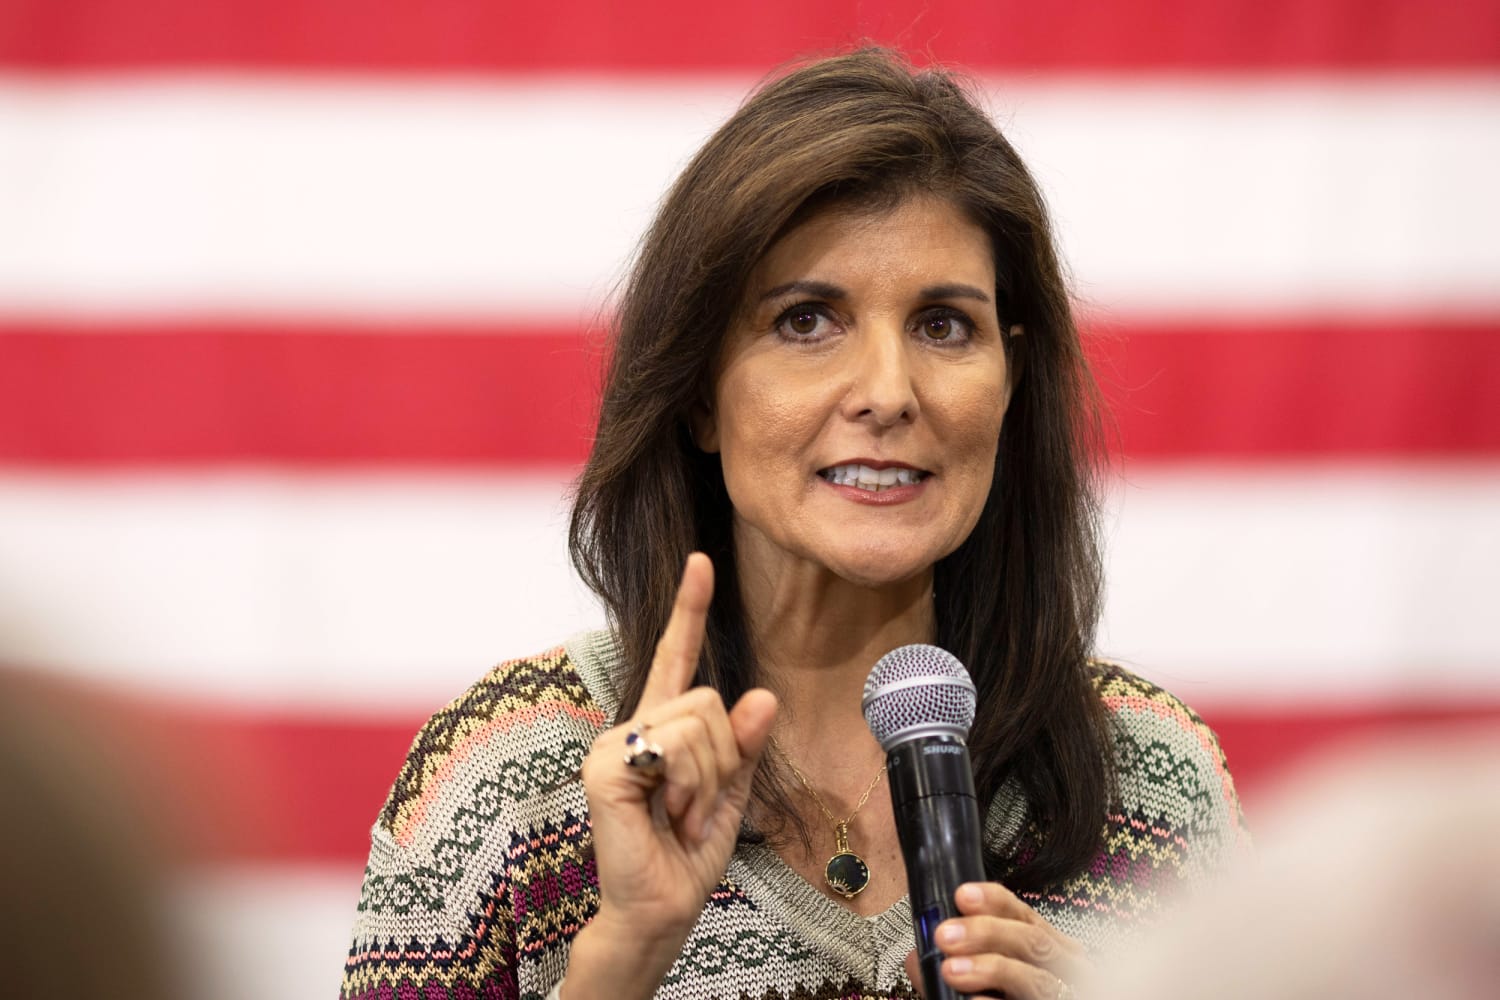 Without Hesitation Or Conflict Nikki Haley Iowa Events 7878